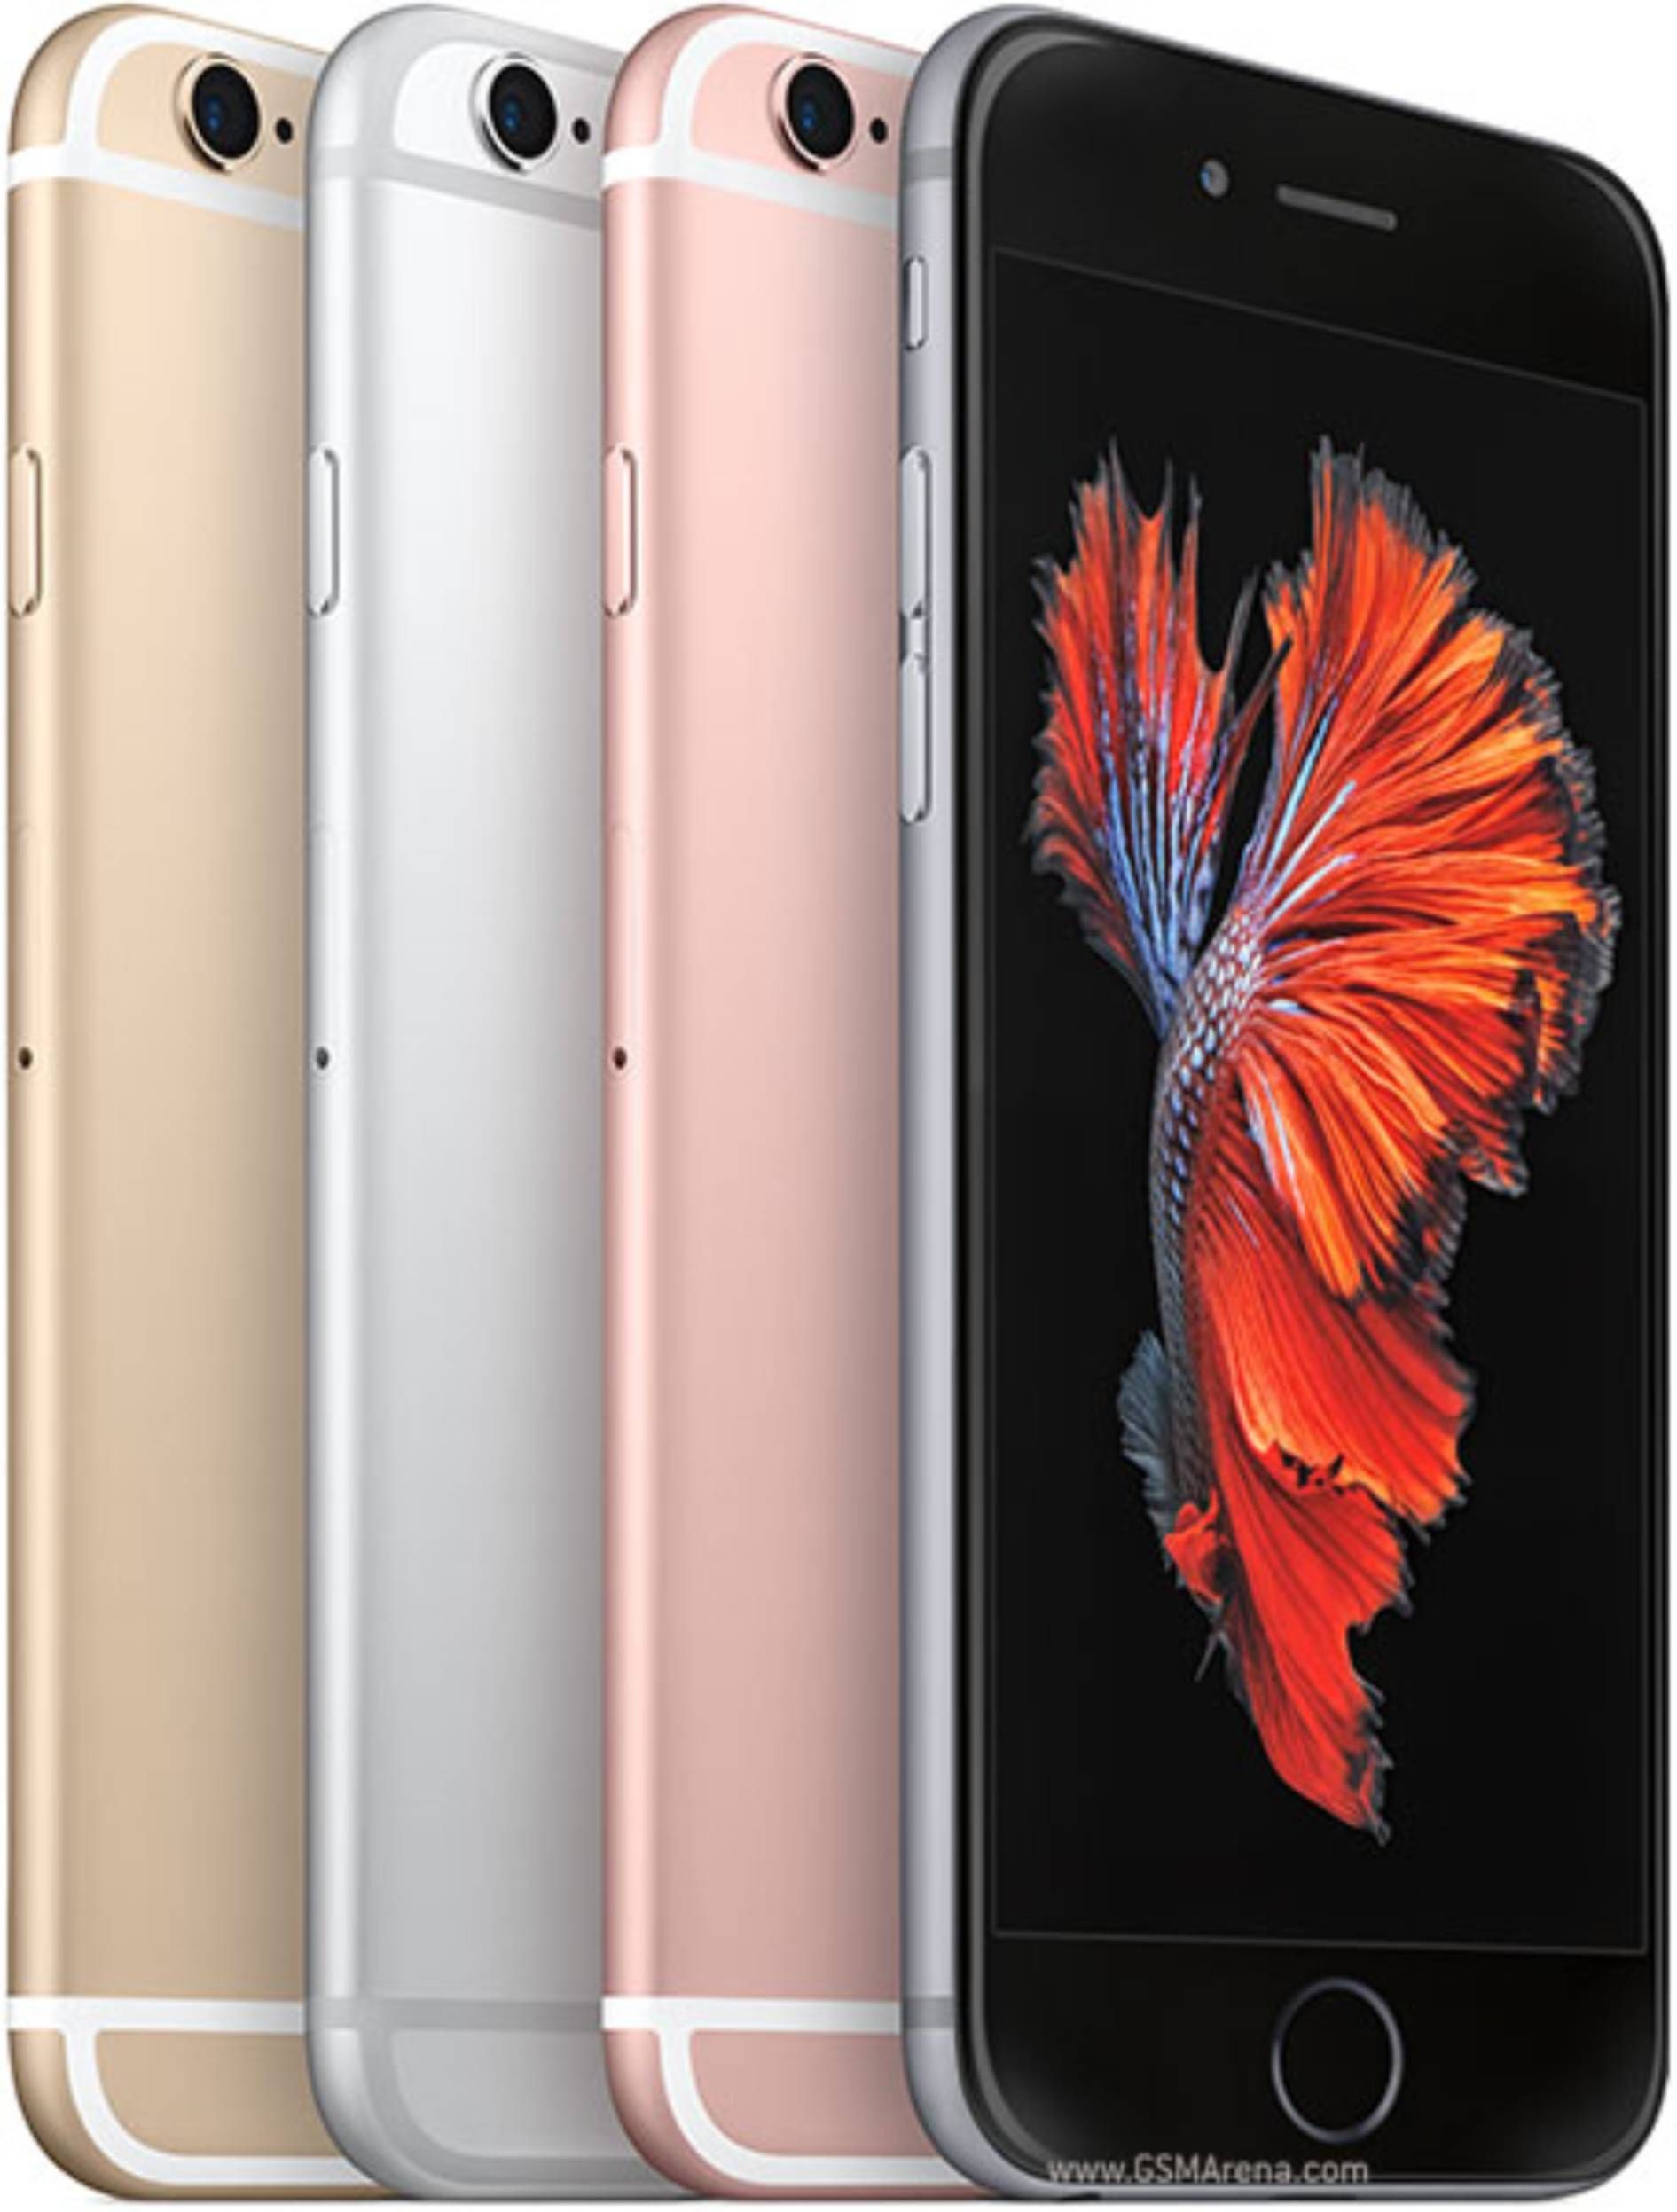 Apple iPhone 6s Specifications and Price in Kenya Shillings